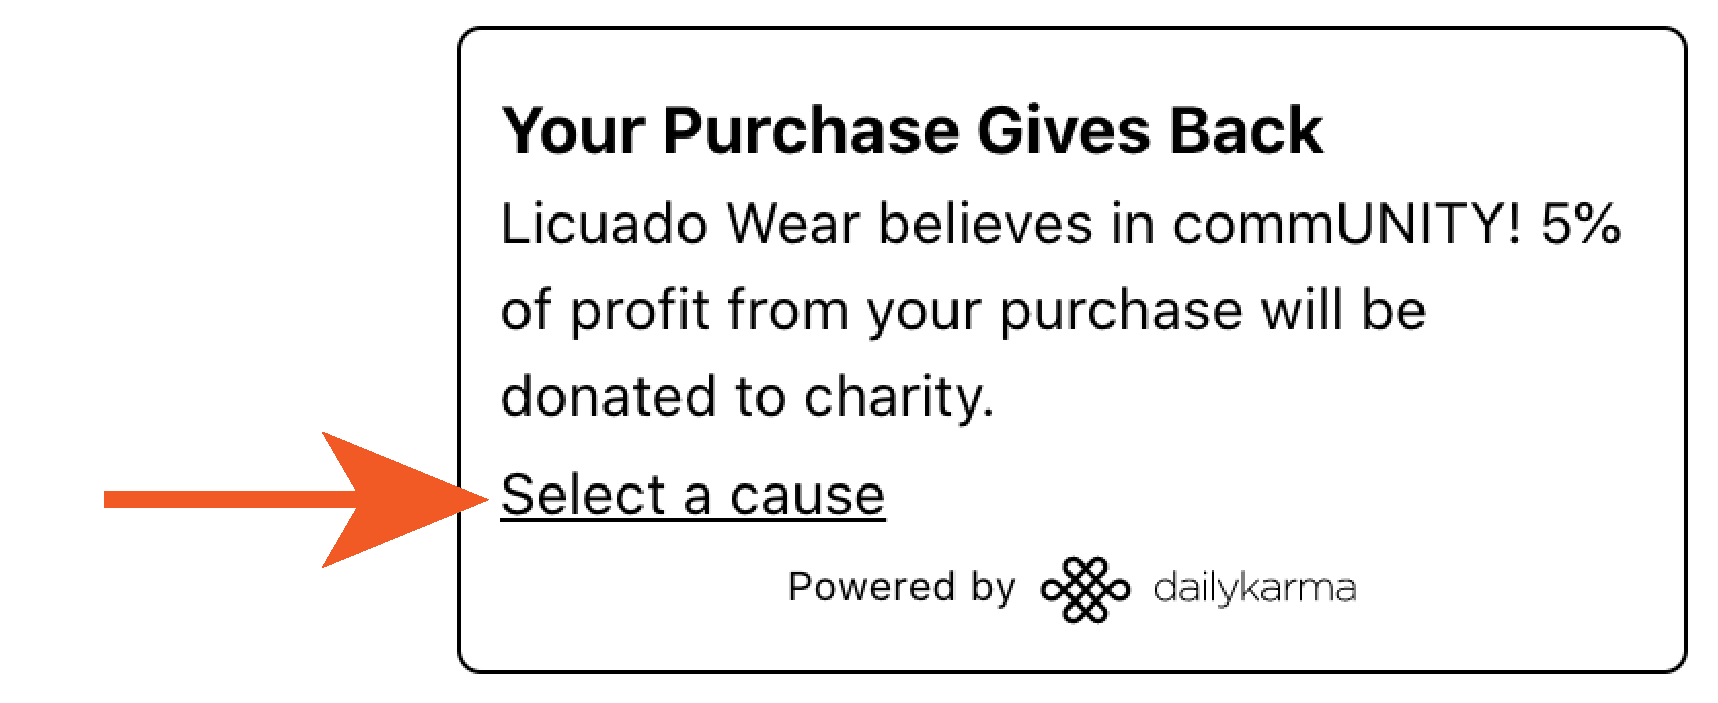 Your Licuado Wear purchase gives back